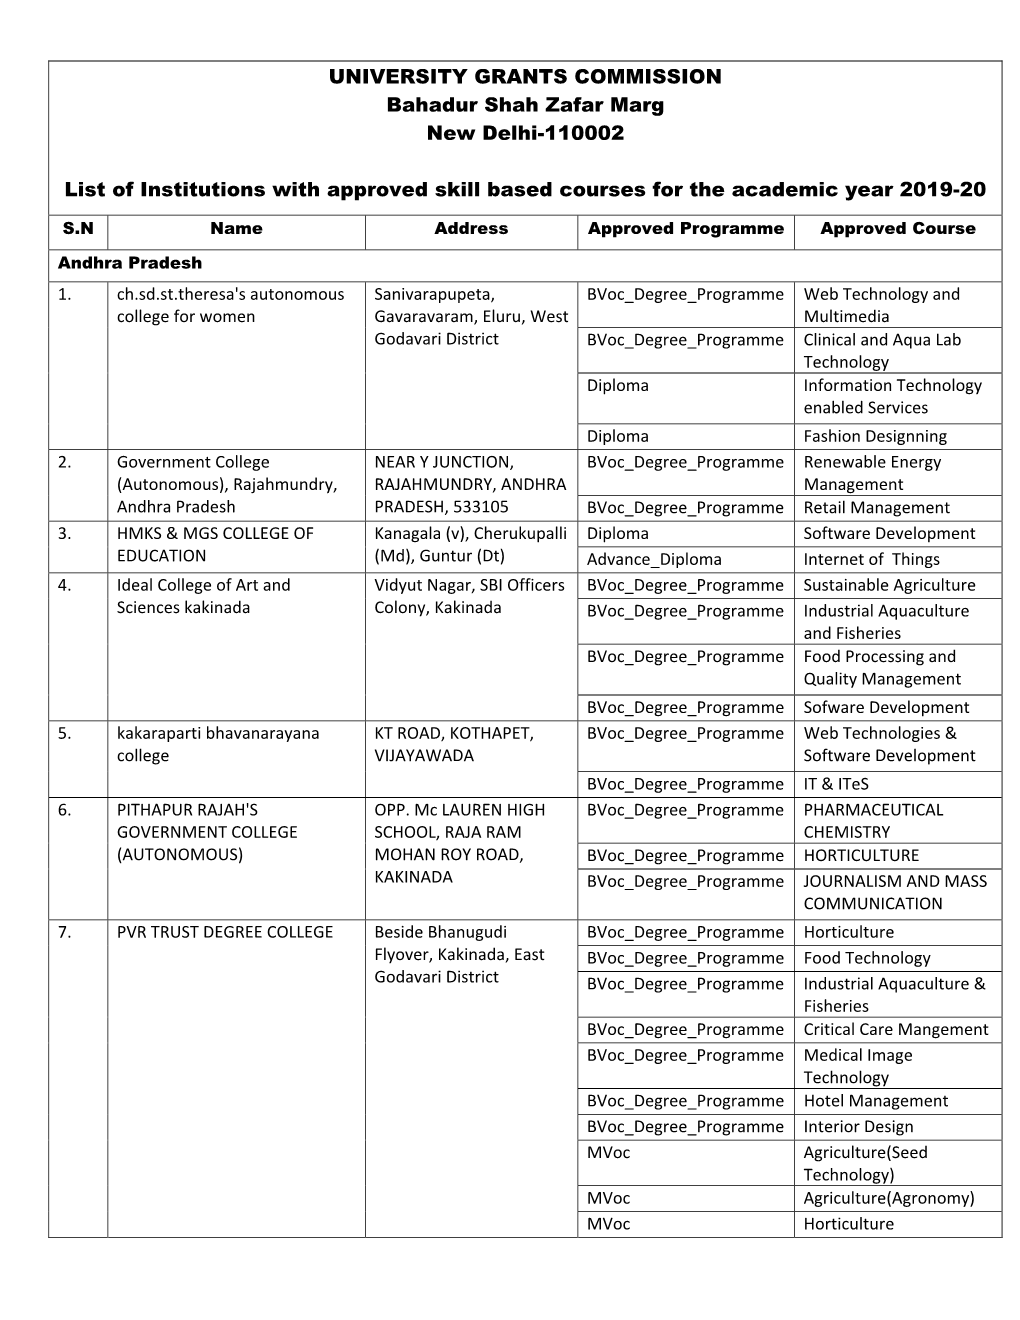 UNIVERSITY GRANTS COMMISSION Bahadur Shah Zafar Marg New Delhi-110002 List of Institutions with Approved Skill Based Courses